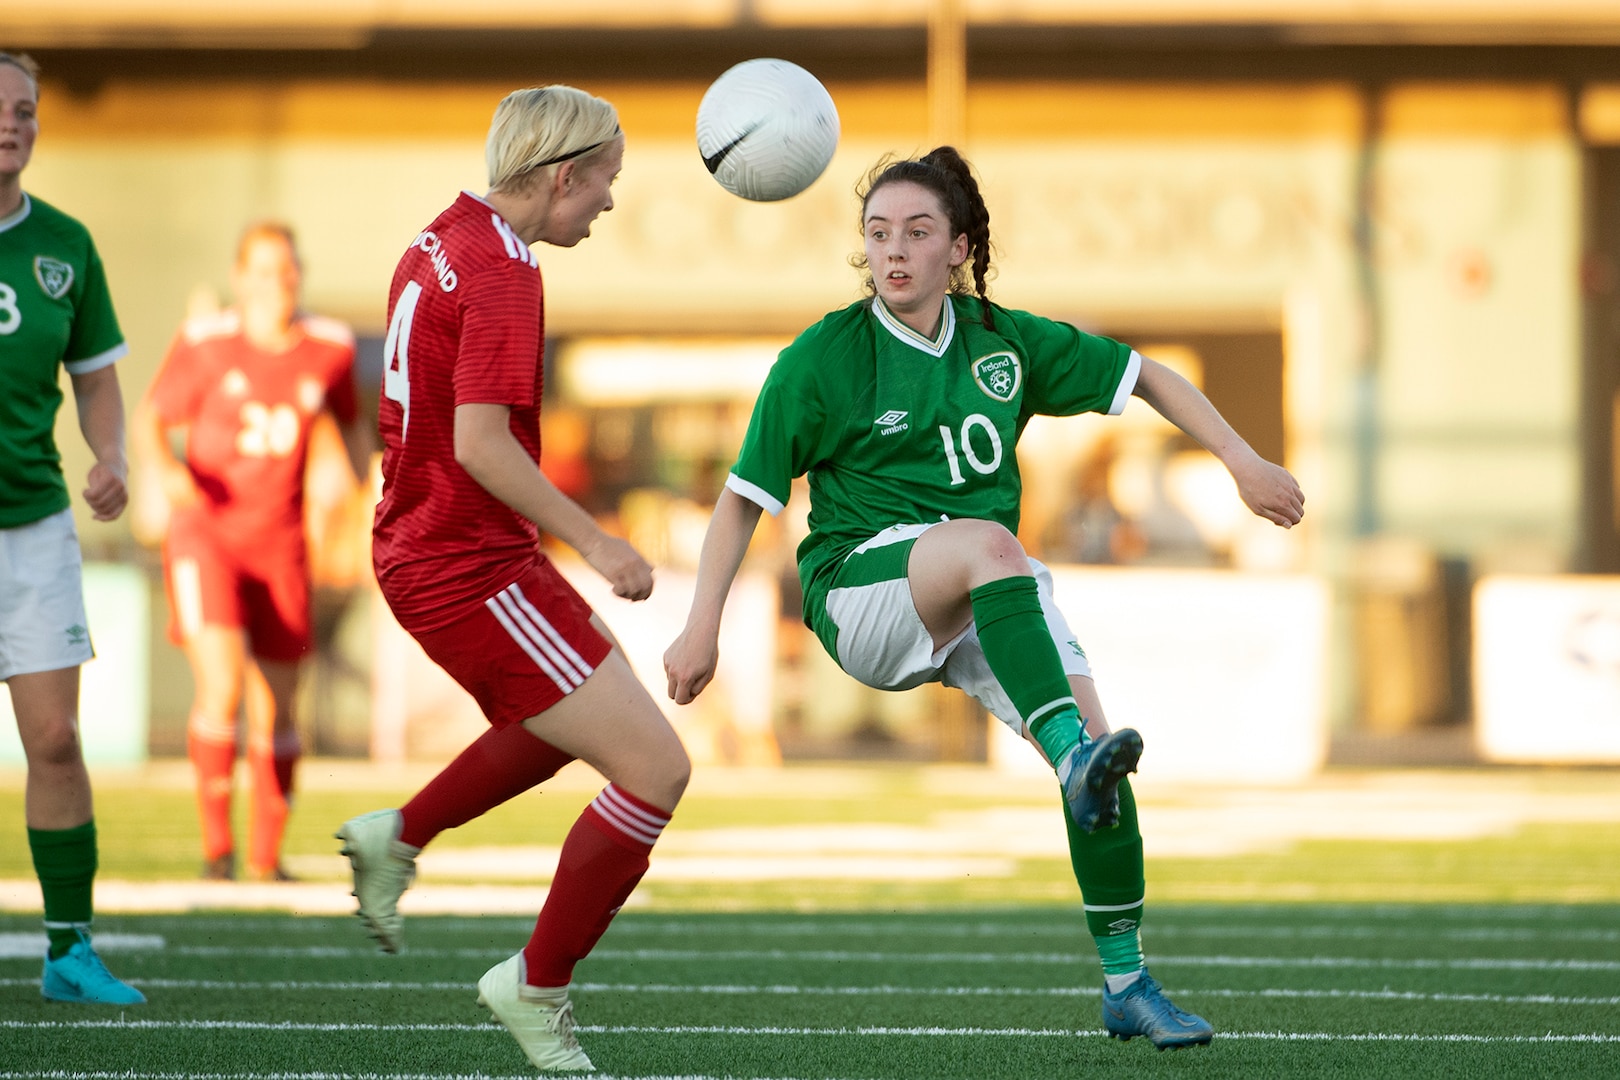 Ireland’s Lt. Angela McGuigan, right, kicks a ball past Germany’s OR-5 Alexandra De Lucia during the second round of opening night for the  13th CISM (International Military Sports Council) World Military Women’s Football Championship in Meade, Washington July 11, 2022.  Germany beat Ireland 3-0. (DoD photo by EJ Hersom)